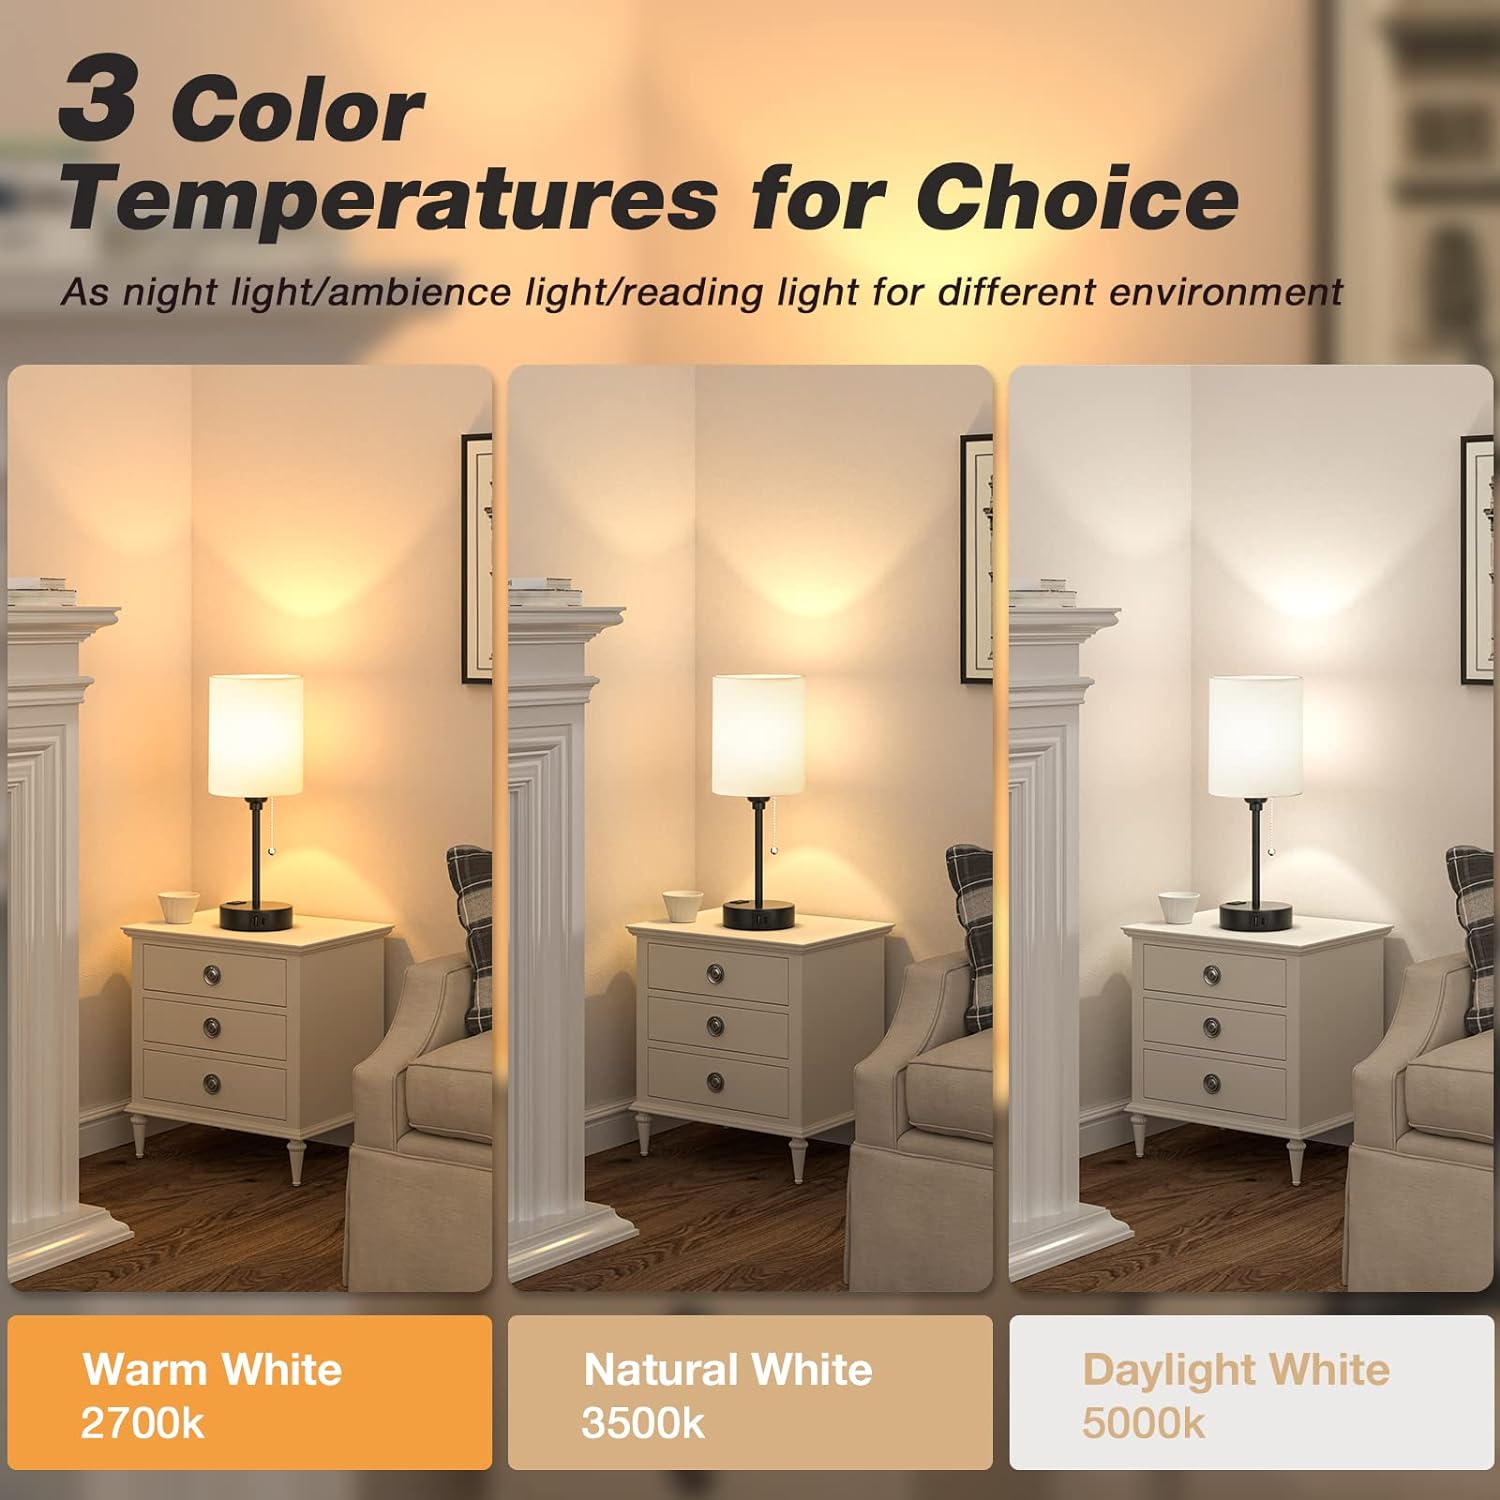 Dicoool Small Bedroom Lamps 3 Color Temperatures - 2700K 3500K 5000K Bedside Lamps with USB C and A Ports, Pull Chain Table Lamps with